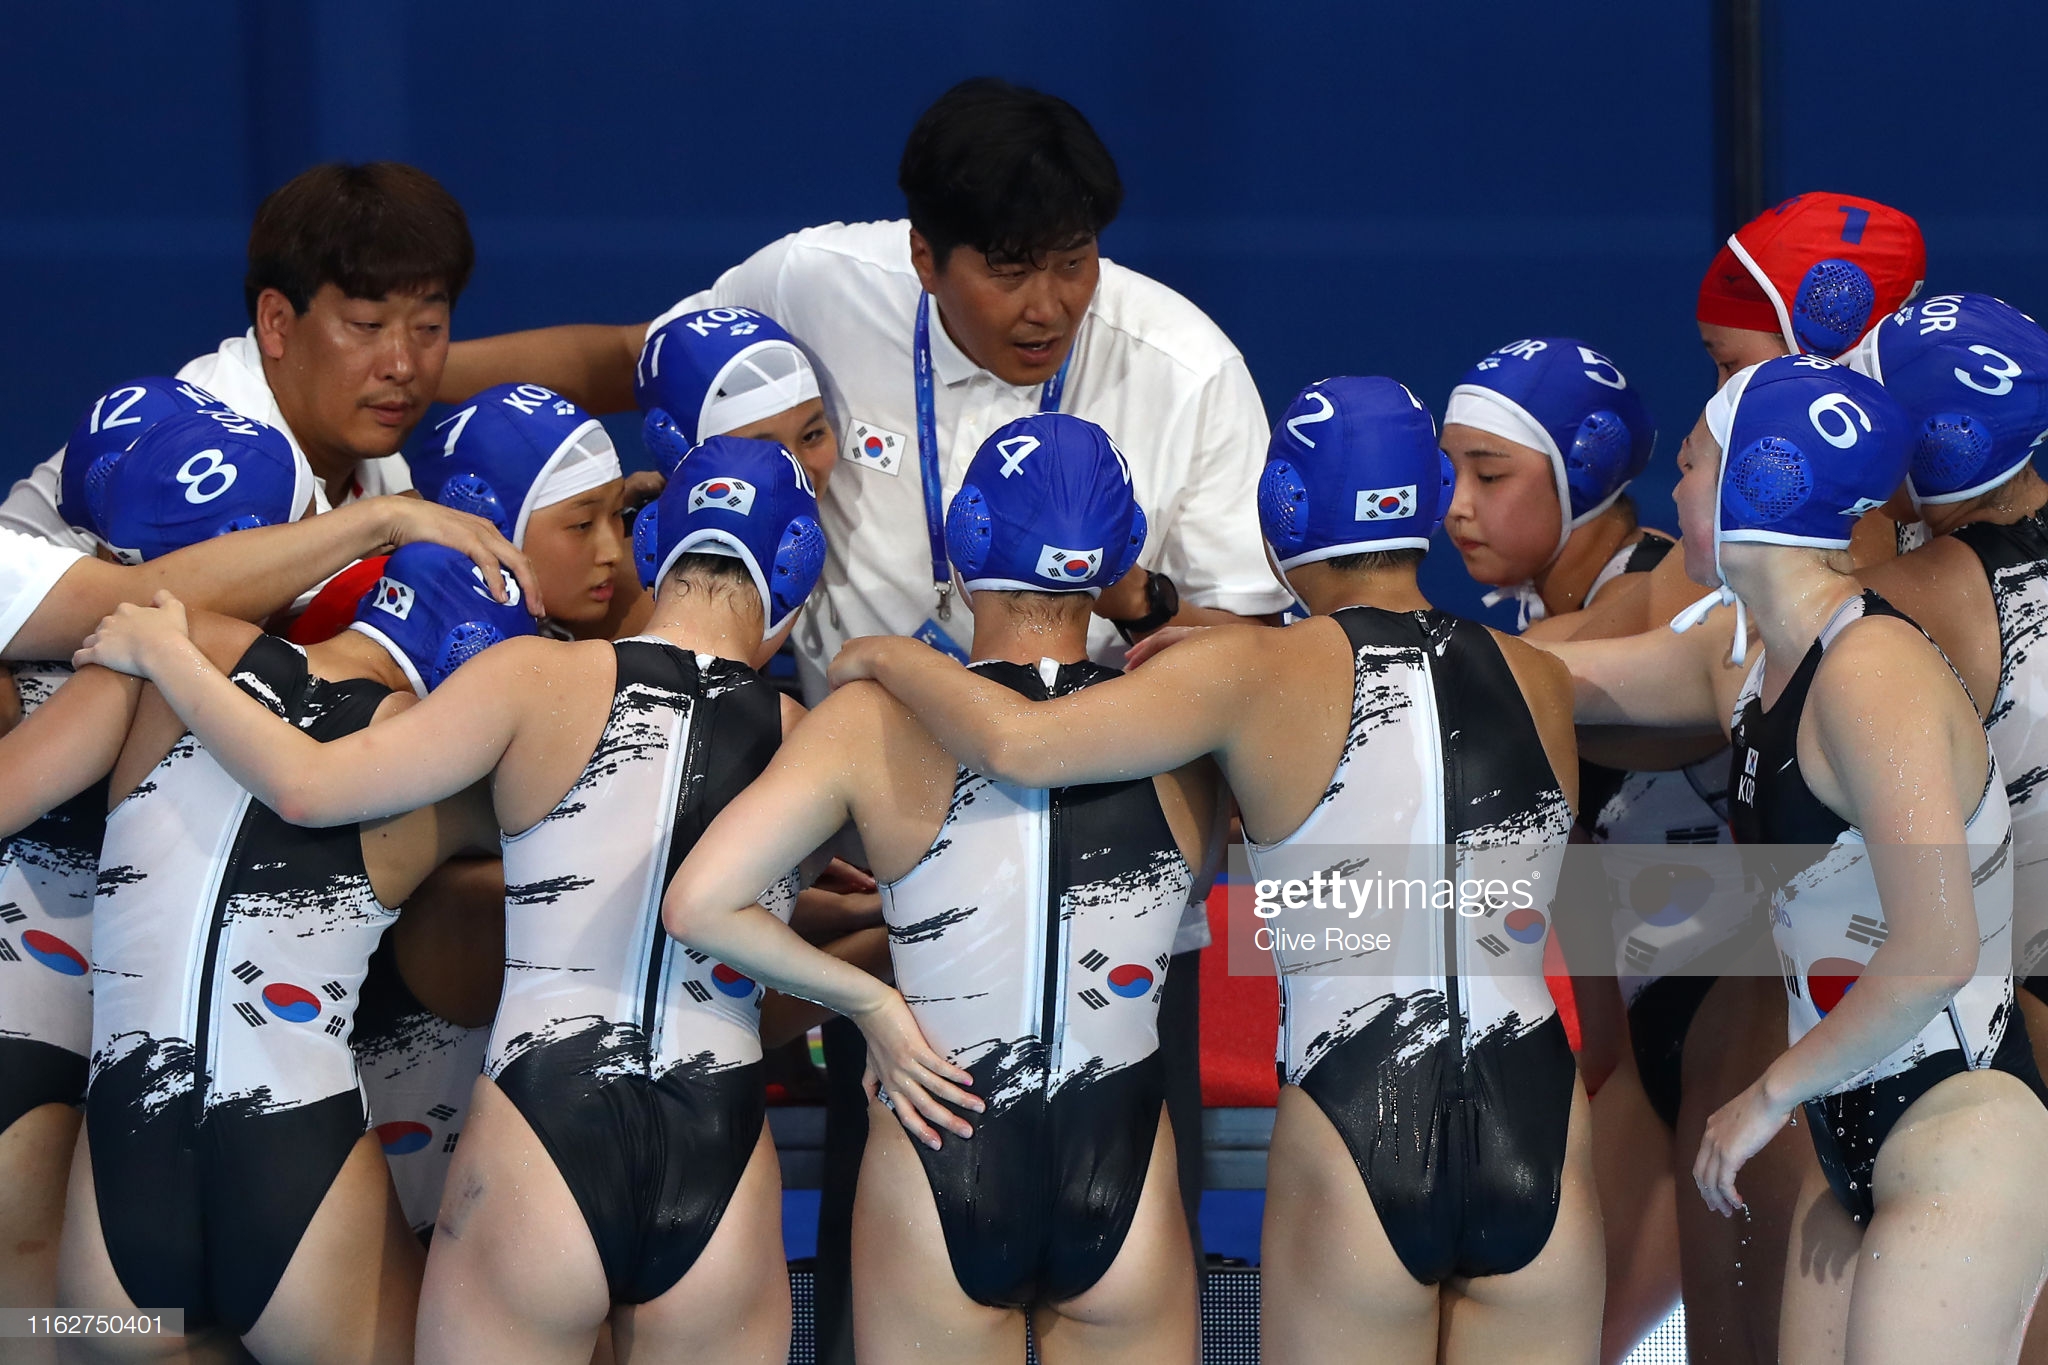 gettyimages-1162750401-2048x2048.jpg